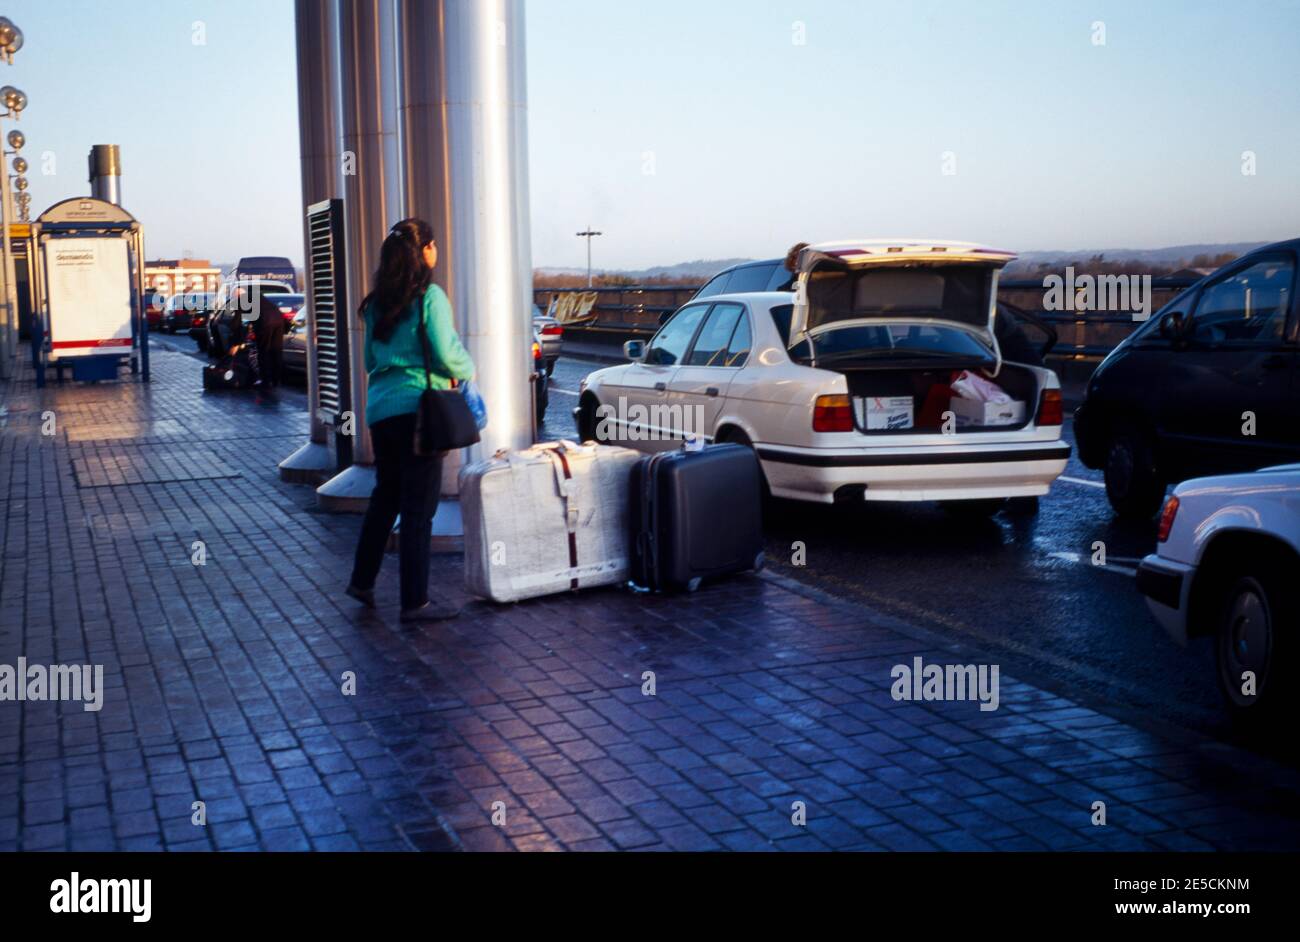 Gatwick Airport England North Terminal Departures Unloading Luggage from Car Boot Stock Photo